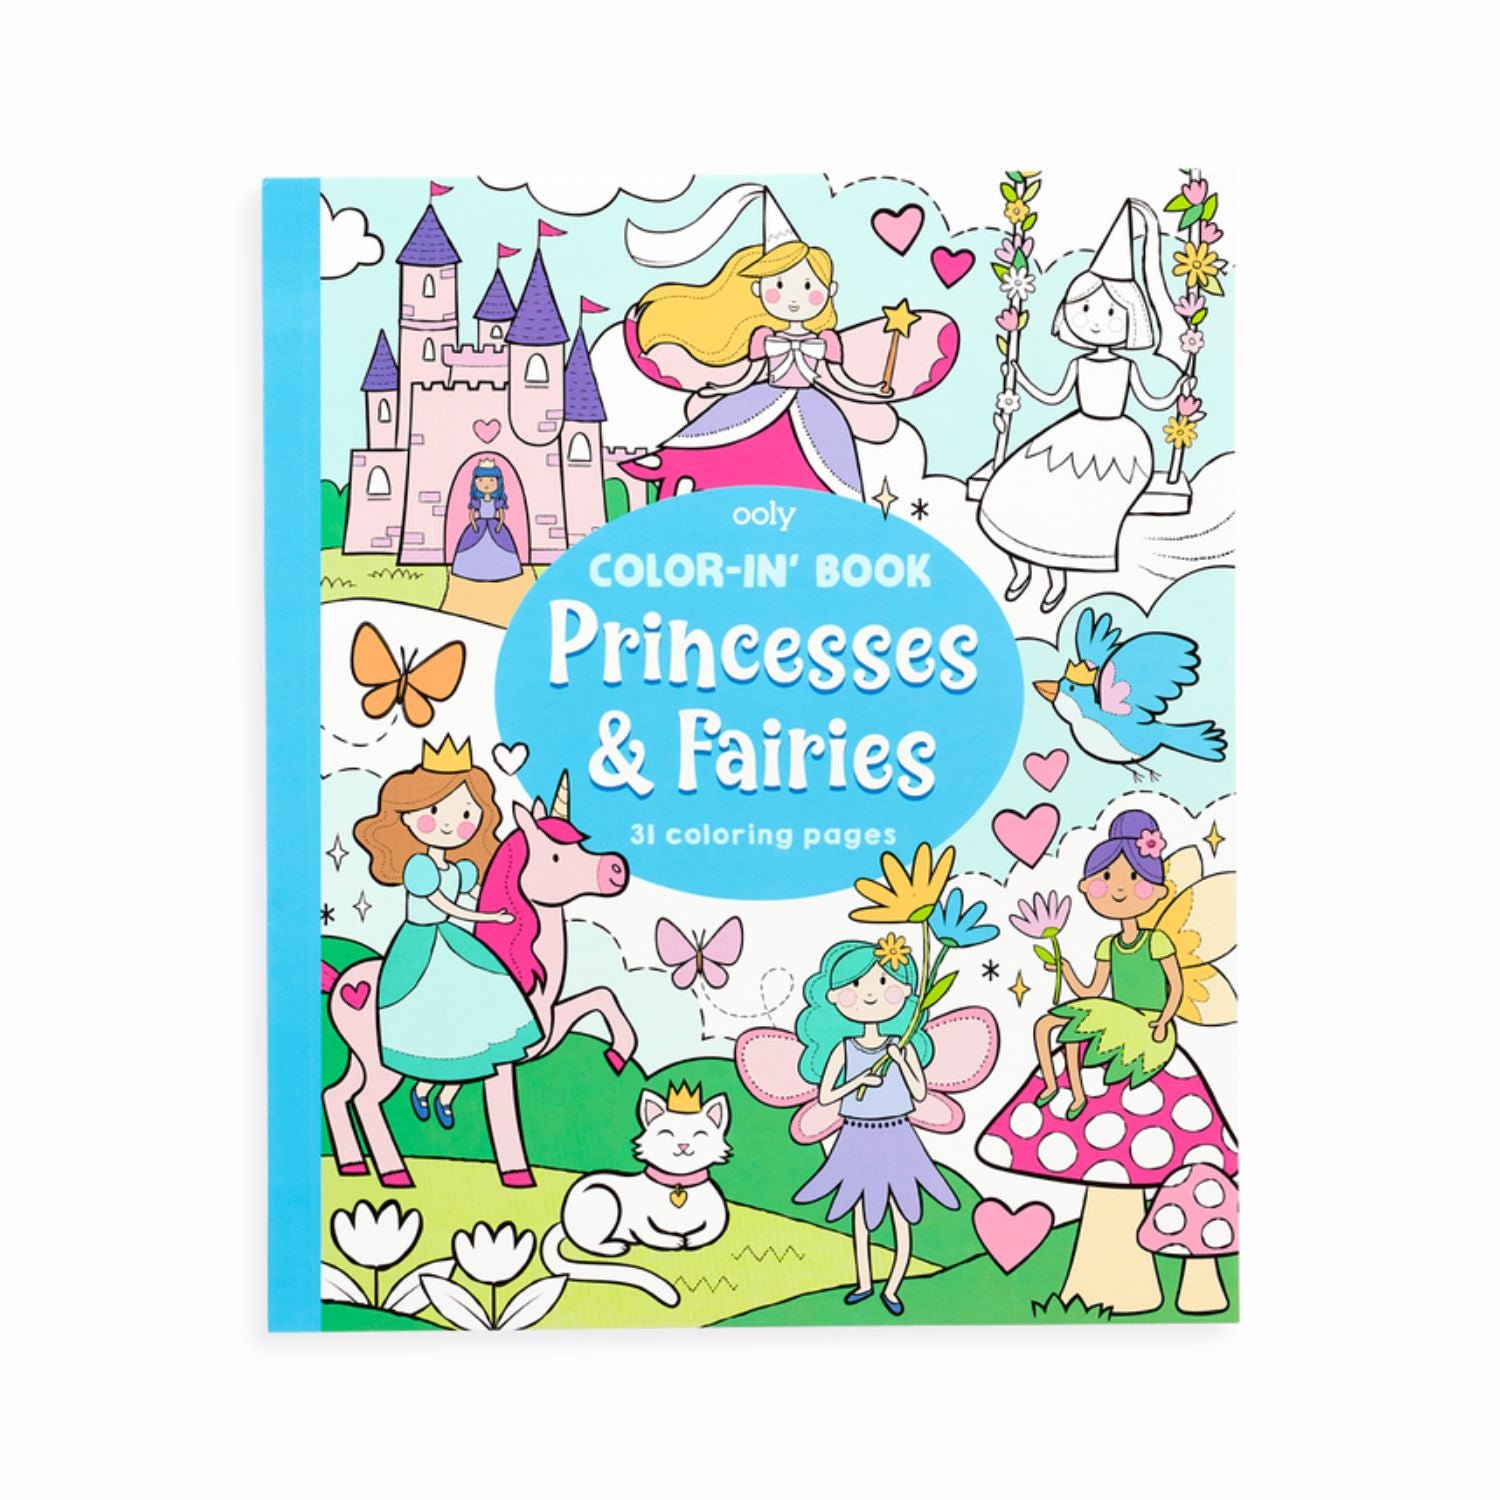 OOLY Color-in' Book - Princesses & Fairies